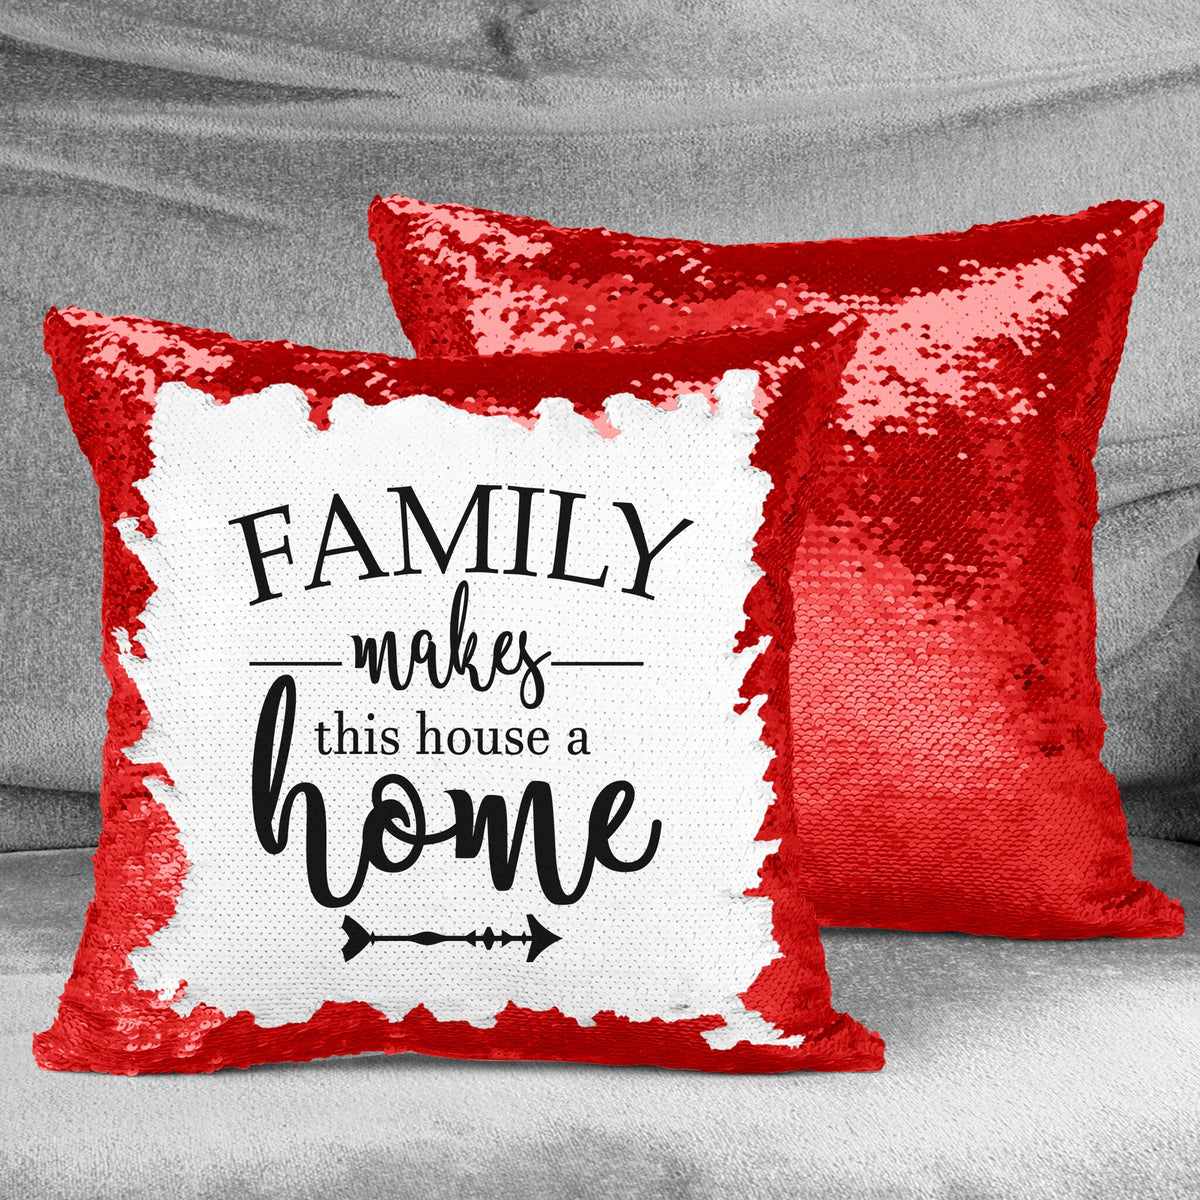 Personalized Sequin Throw Pillow | Custom Sequin Pillow | Family Makes This House a Home